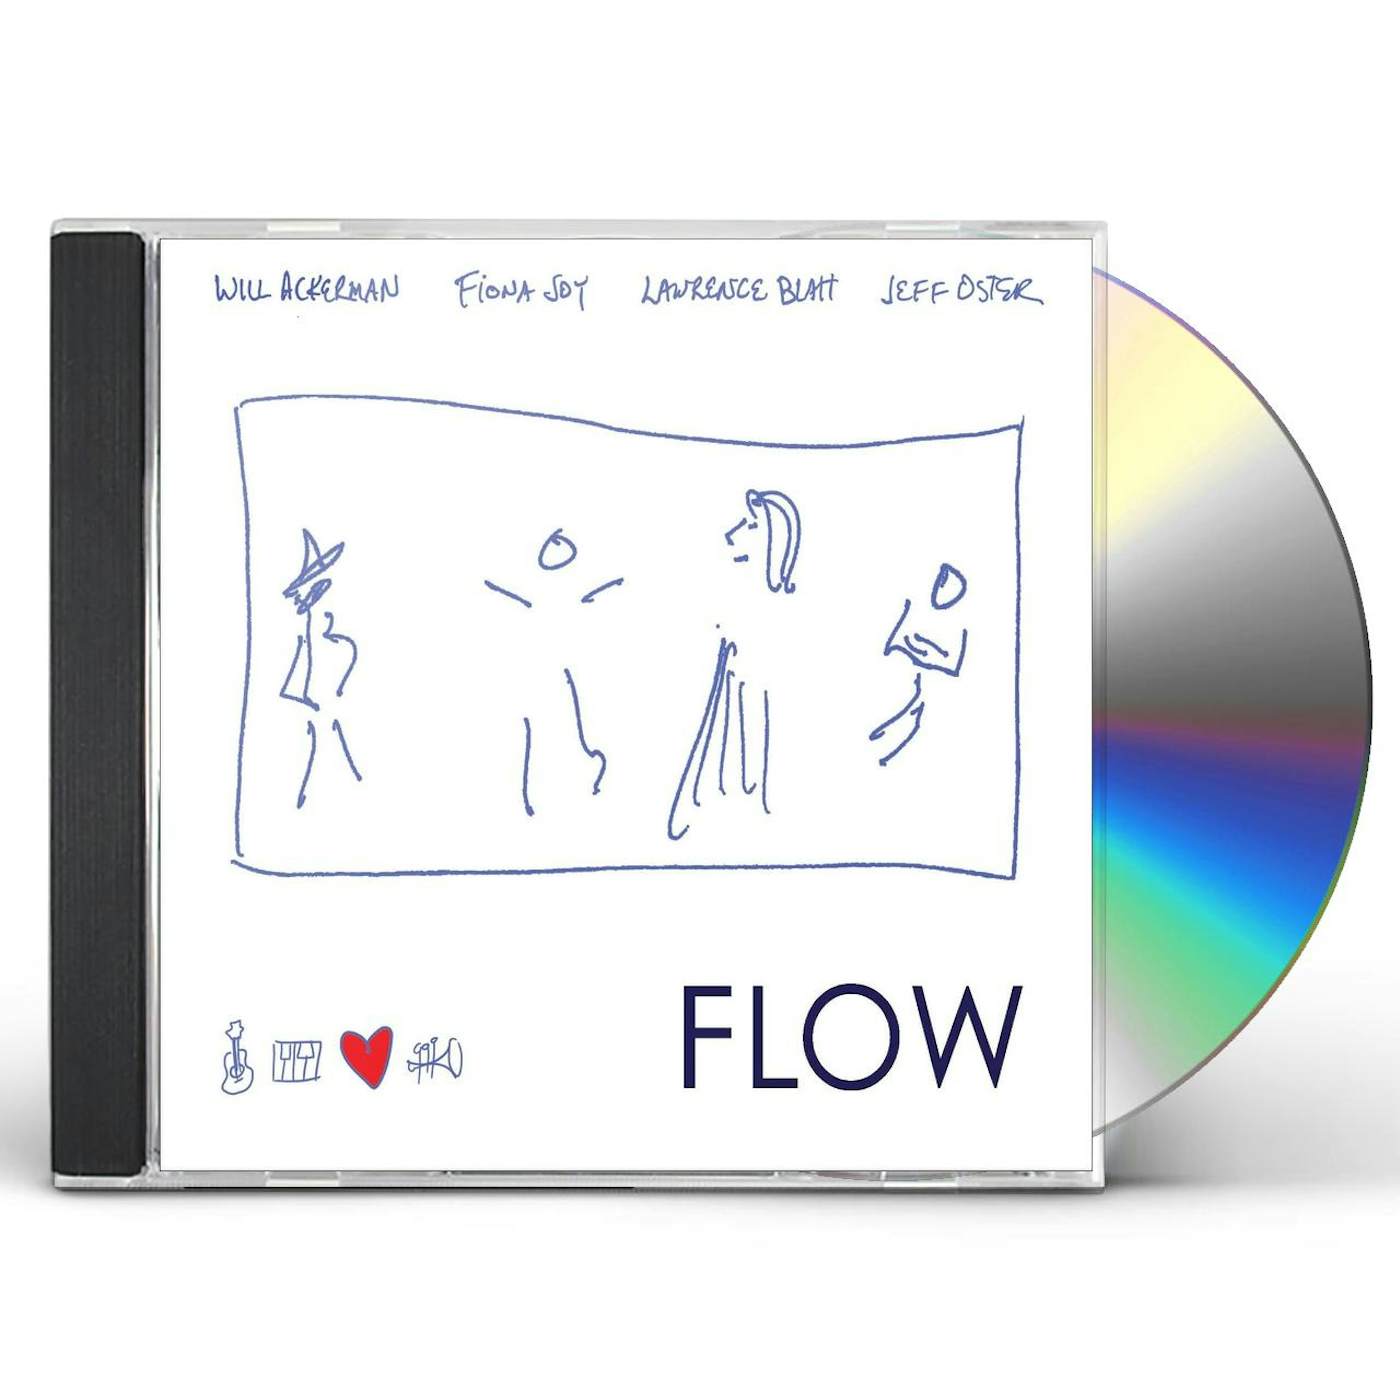 The Flow CD